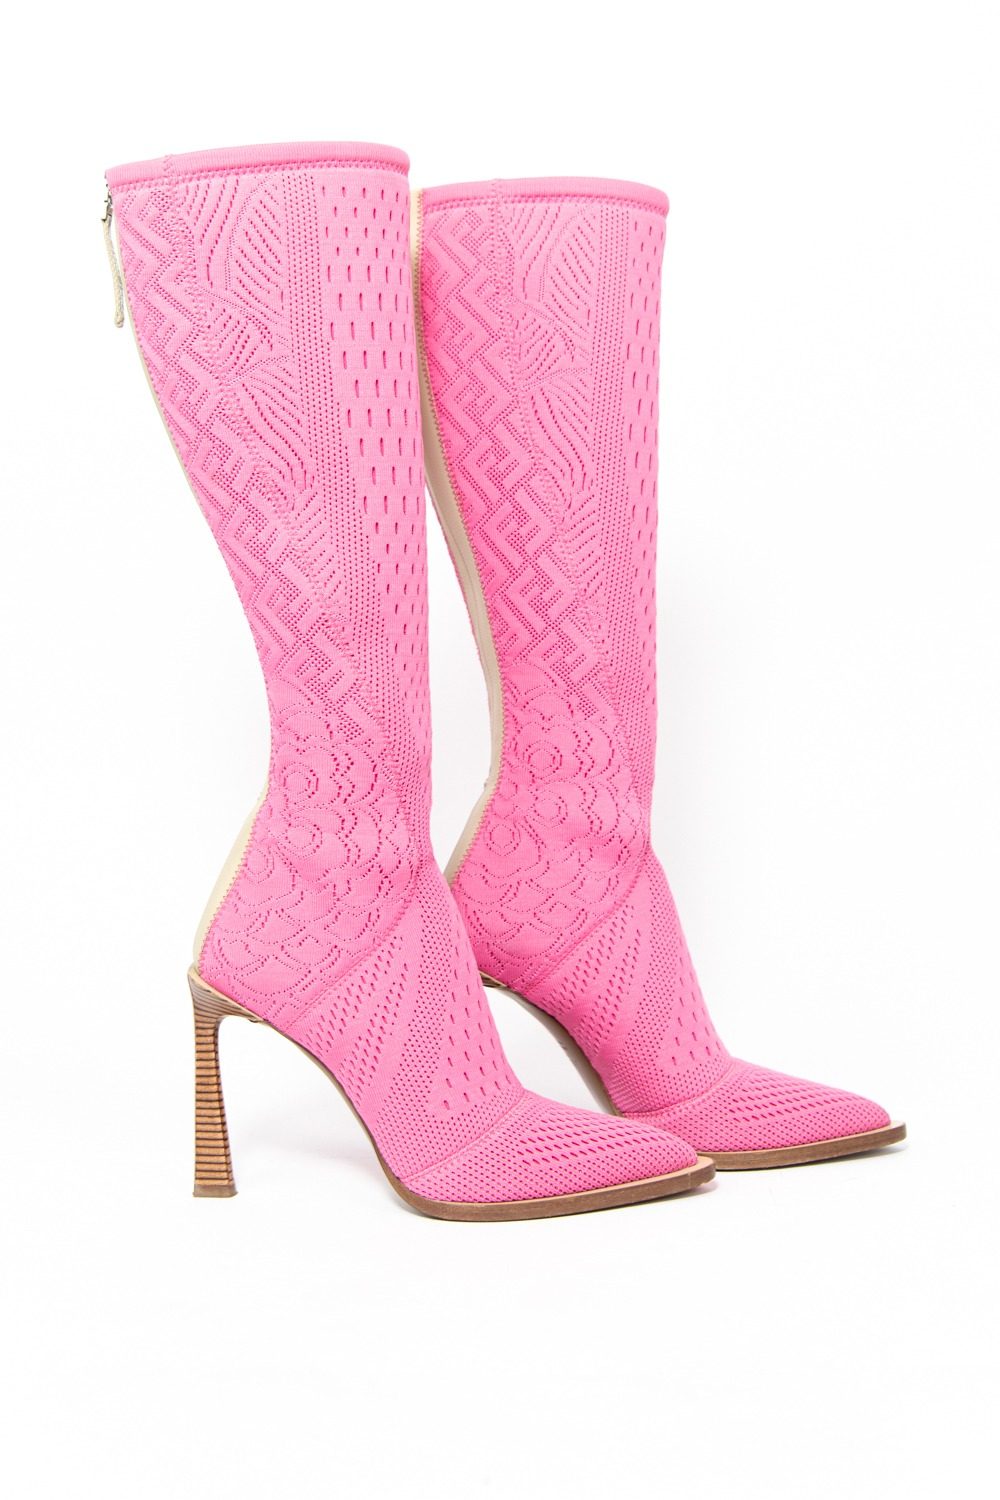 Thumbnail of http://Fendi%20Hohe%20Stiefel%20aus%20Mesh%20in%20Pink